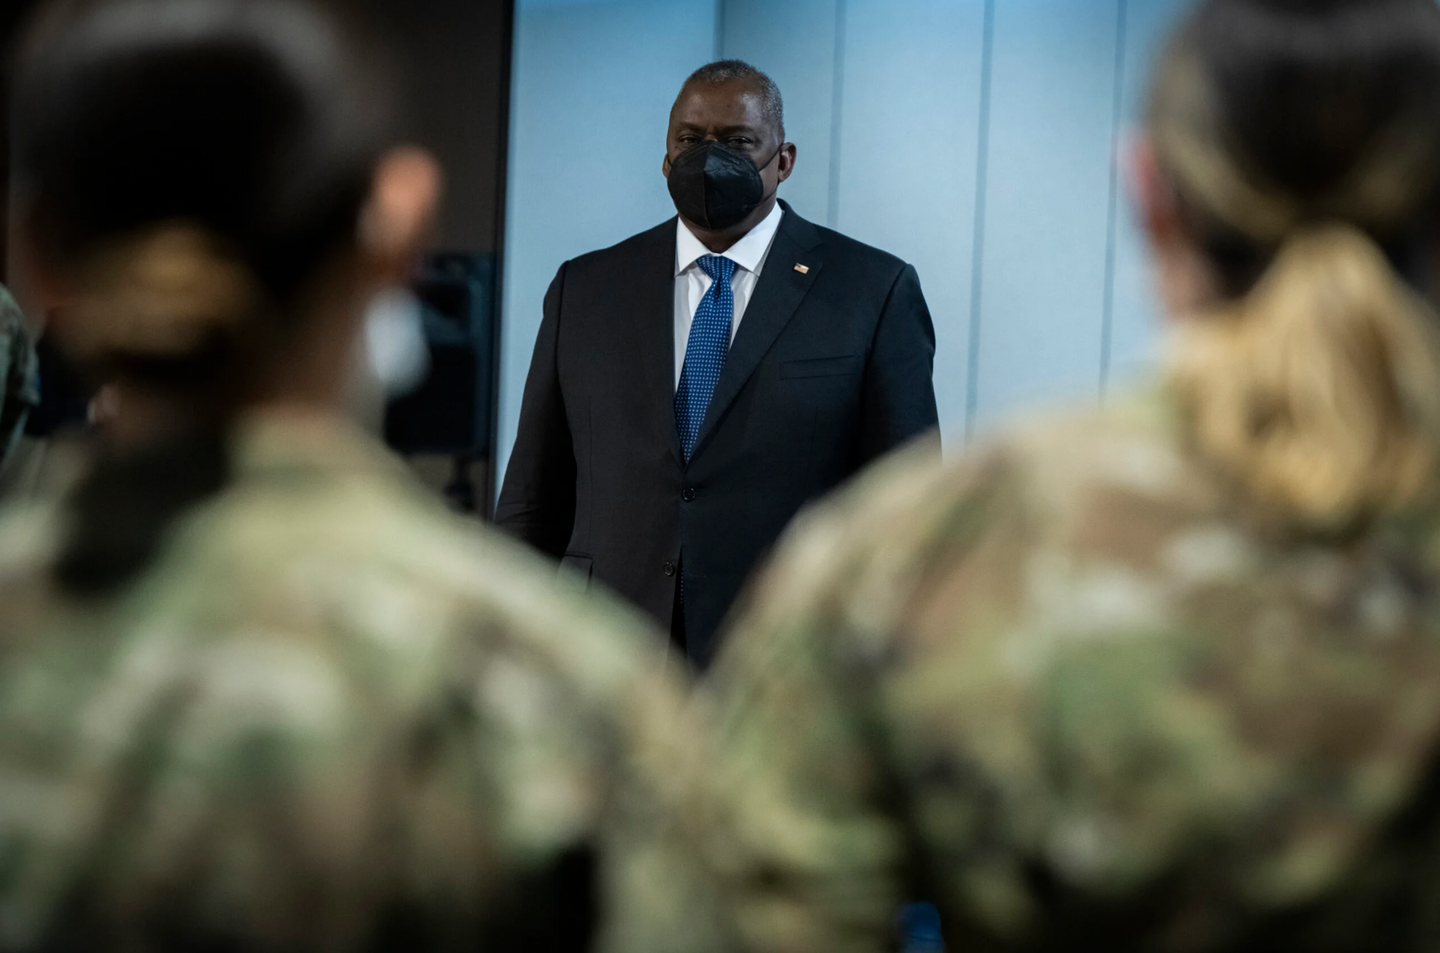 Secretary of Defense Lloyd J. Austin III visits with service members at Peterson Space Force Base, Colo., June 7, 2022. (Chad J. McNeeley/DoD)